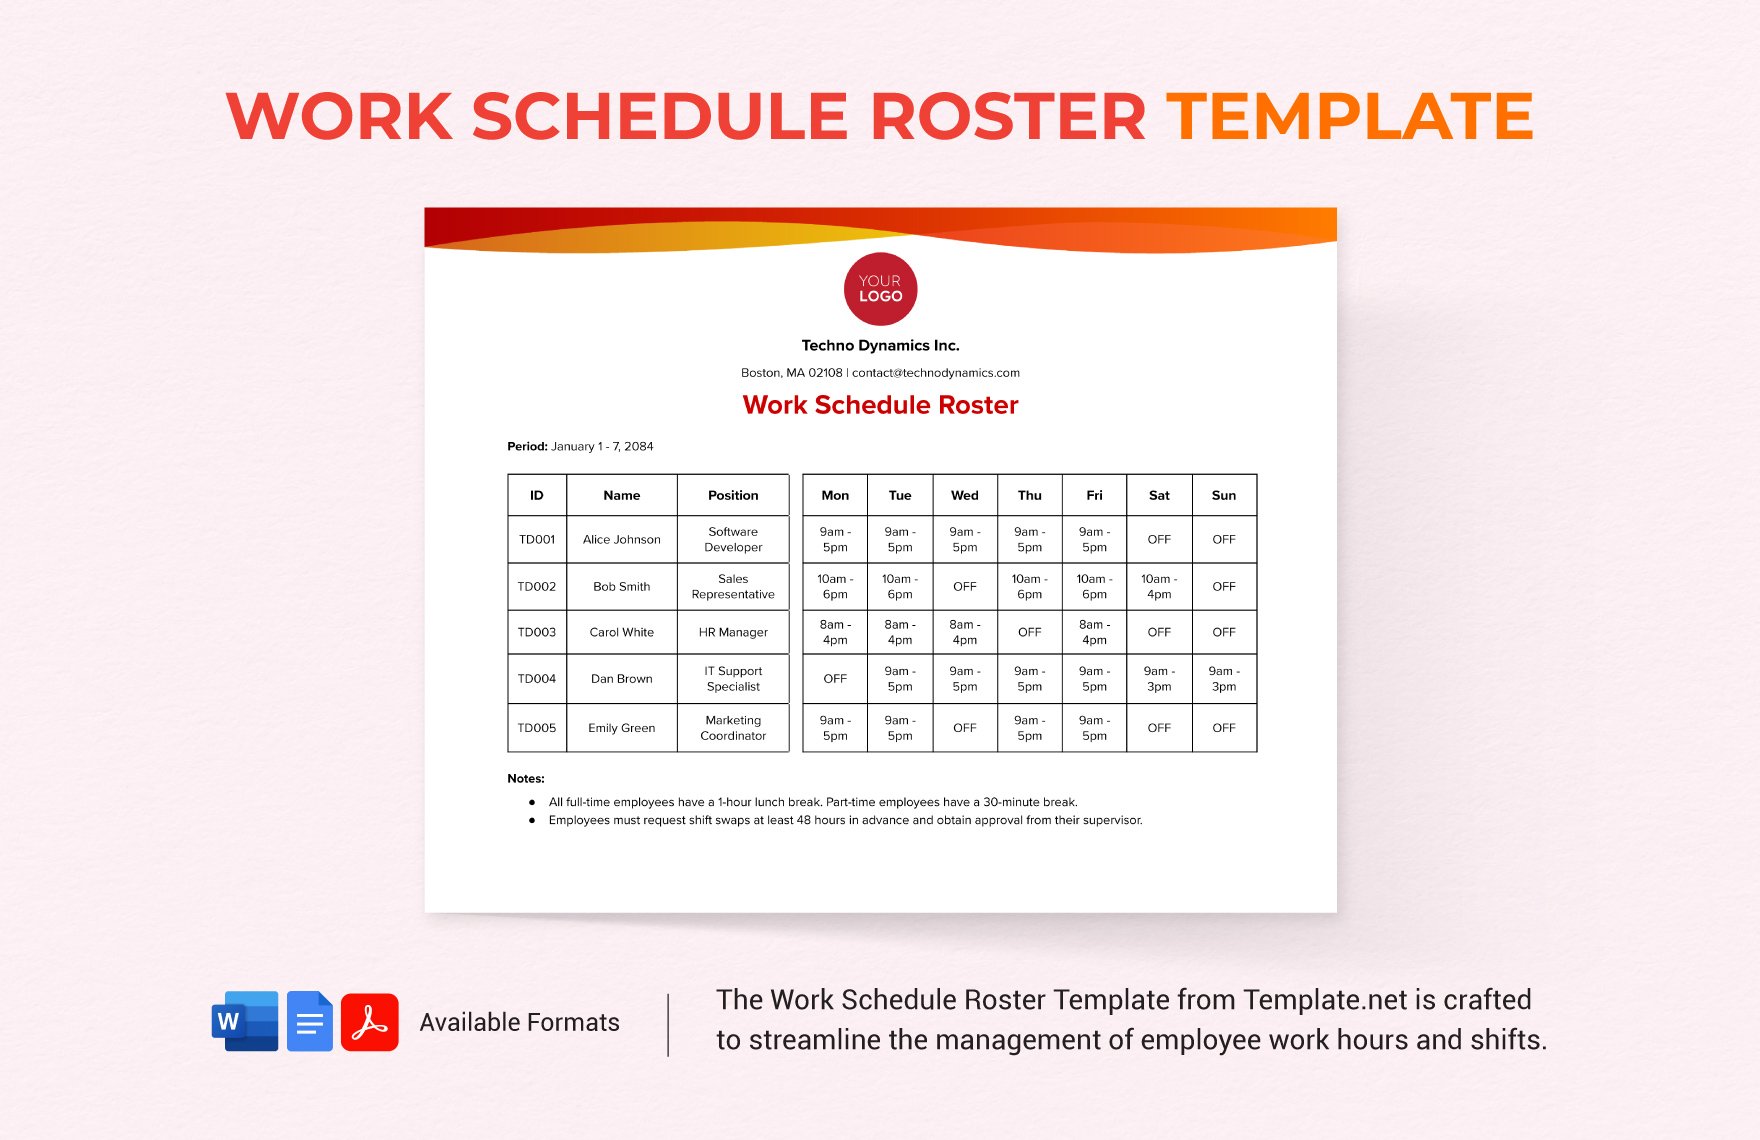 Work Schedule Roster Template